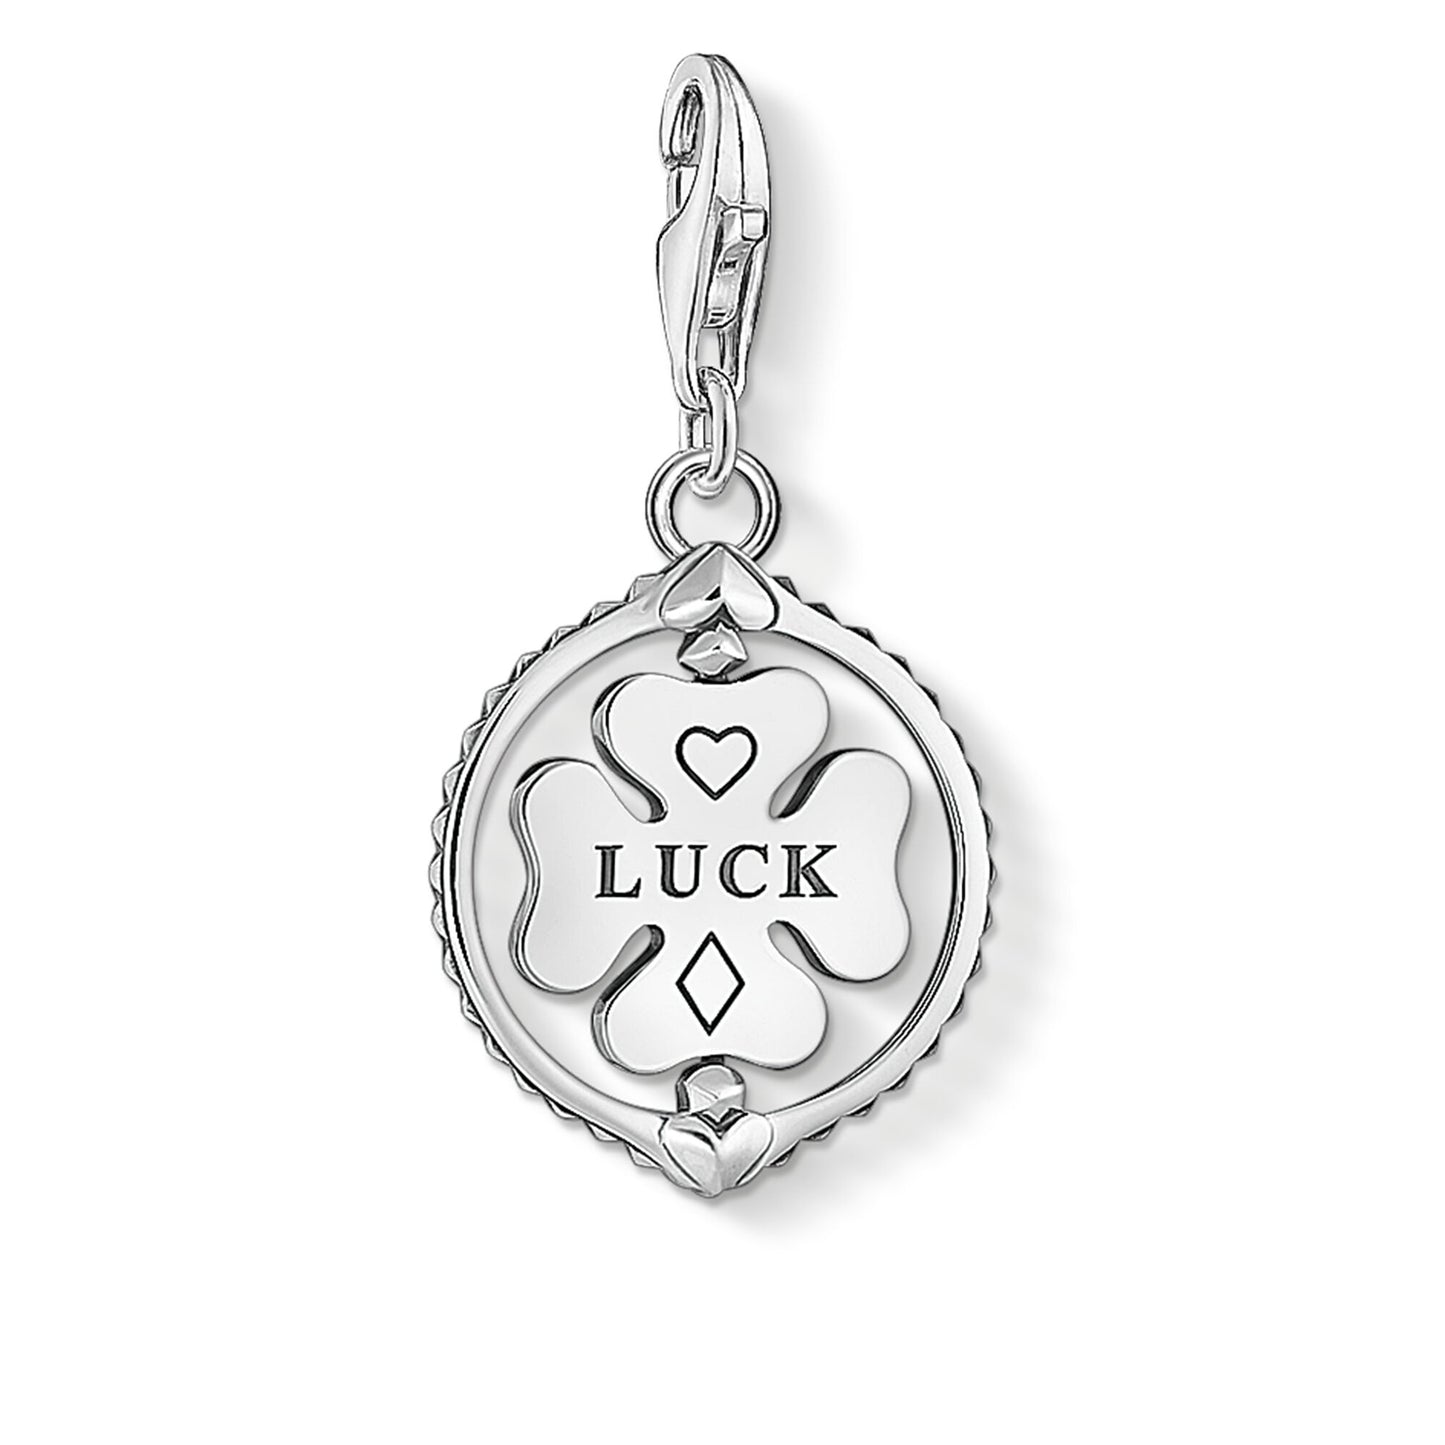 CHARM CLUB STERLING SILVER ROTATING LUCKY CLOVER LEAF CHARM